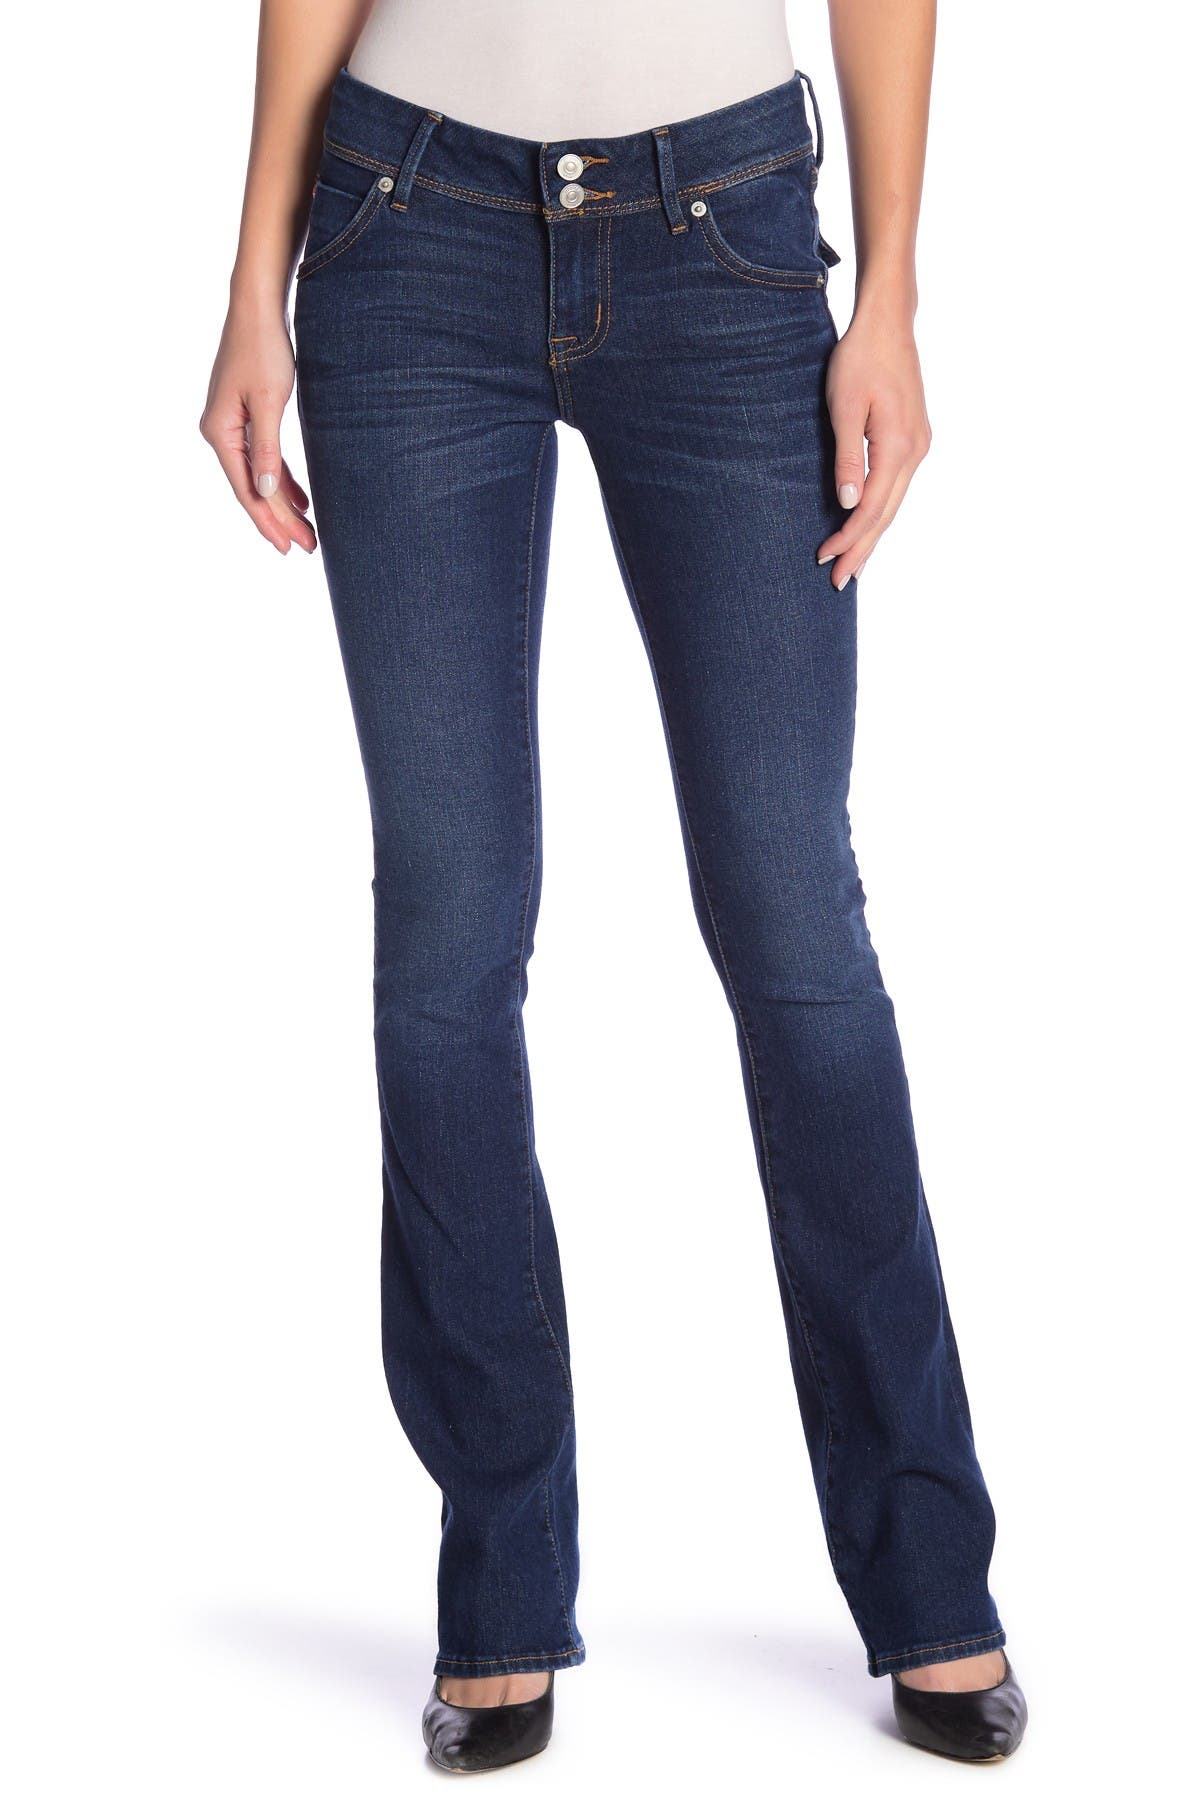 hudson beth baby bootcut jeans